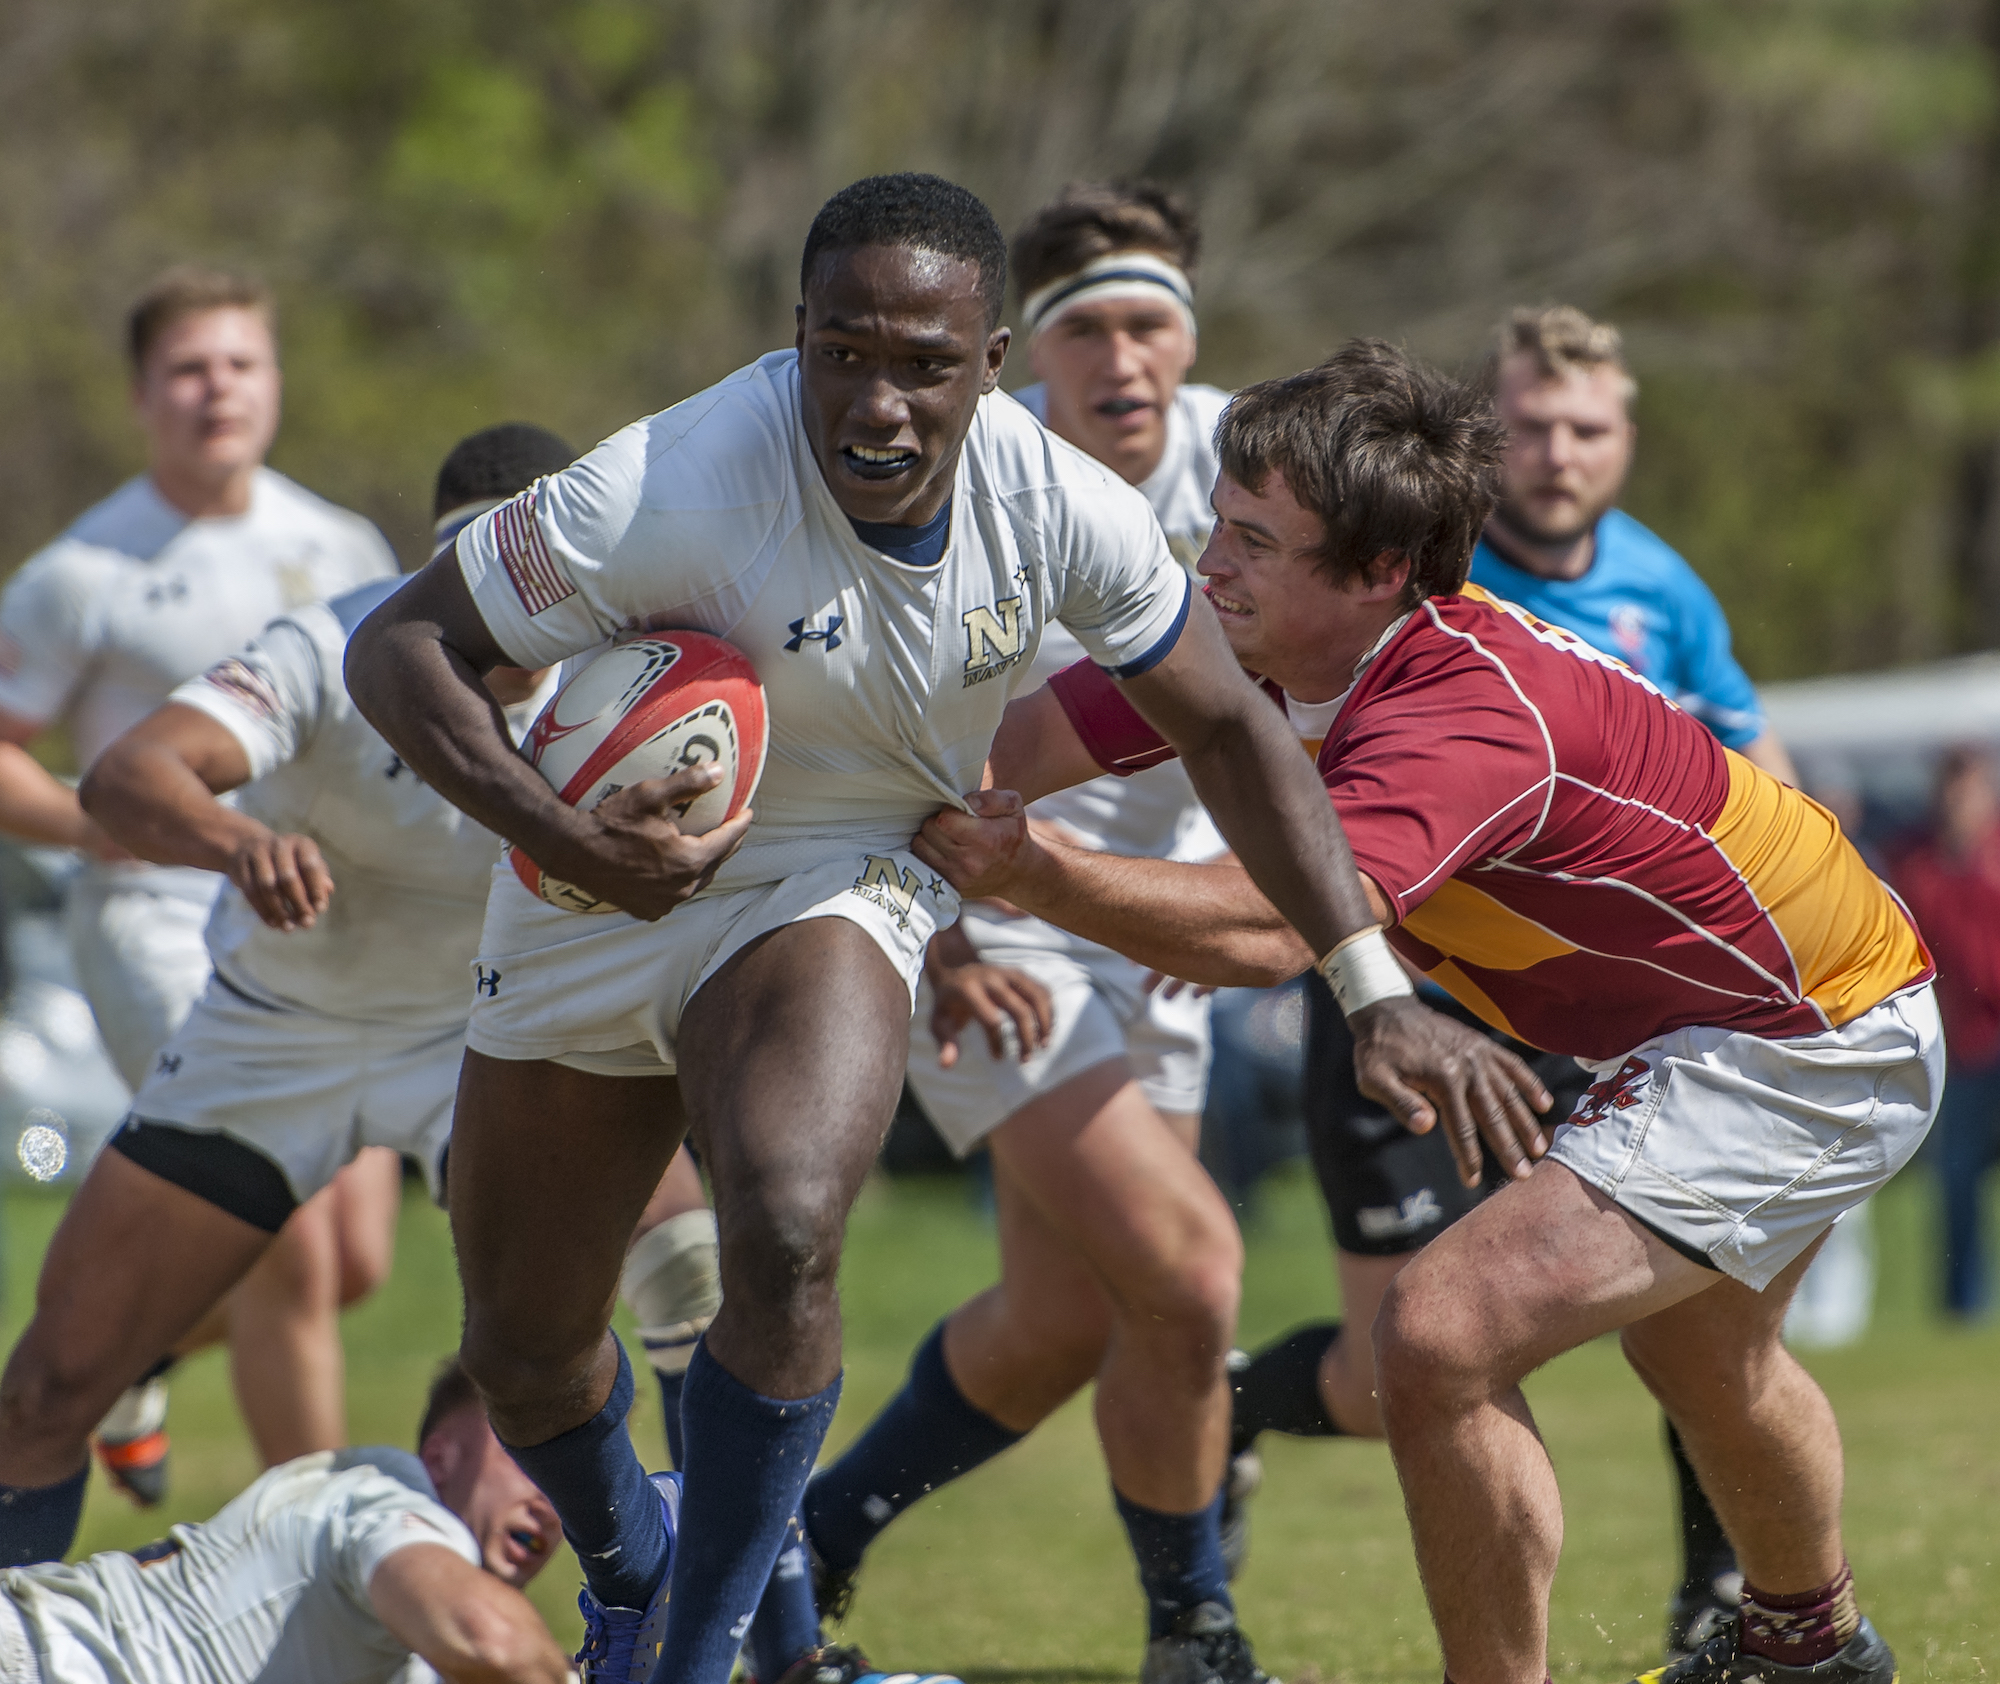 Navy v Boston College rugby in the 2017 Varsity Cup. Colleen McCloskey photo for Goff Rugby Report.